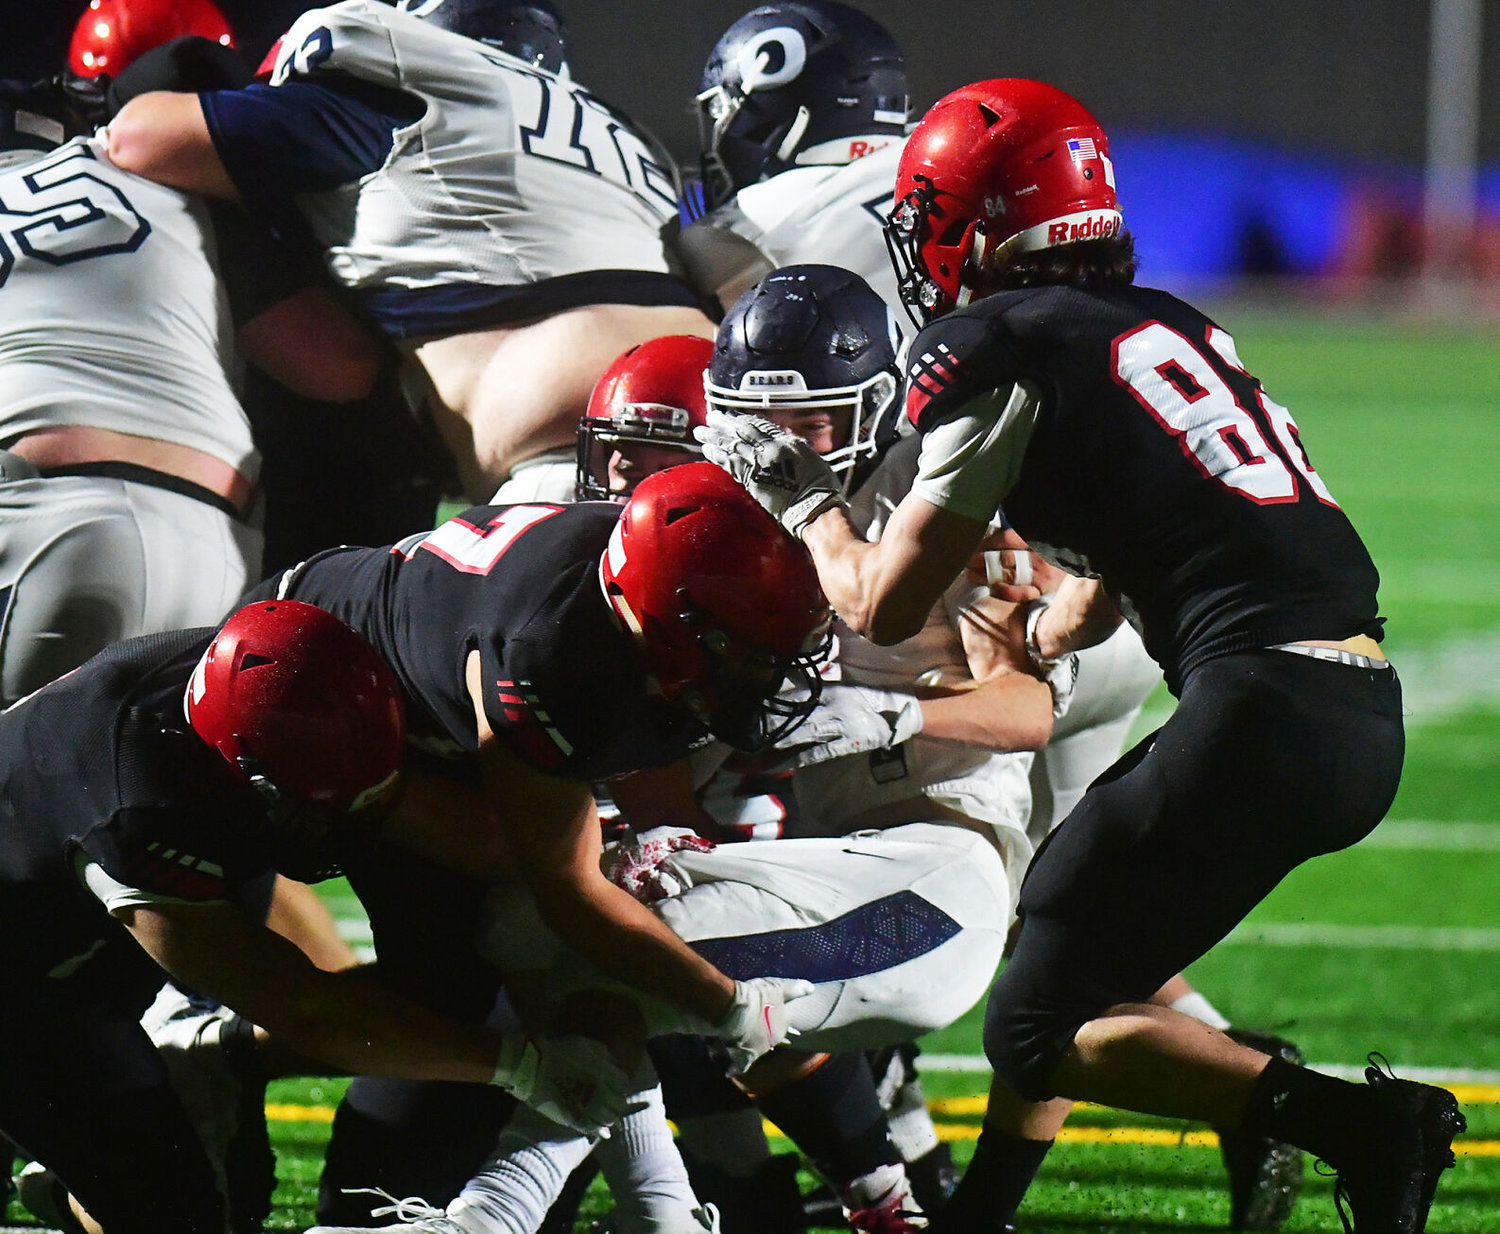 Yelm High School defenders smother an Olympia High School running back on Friday, Feb. 19, at the YHS stadium.